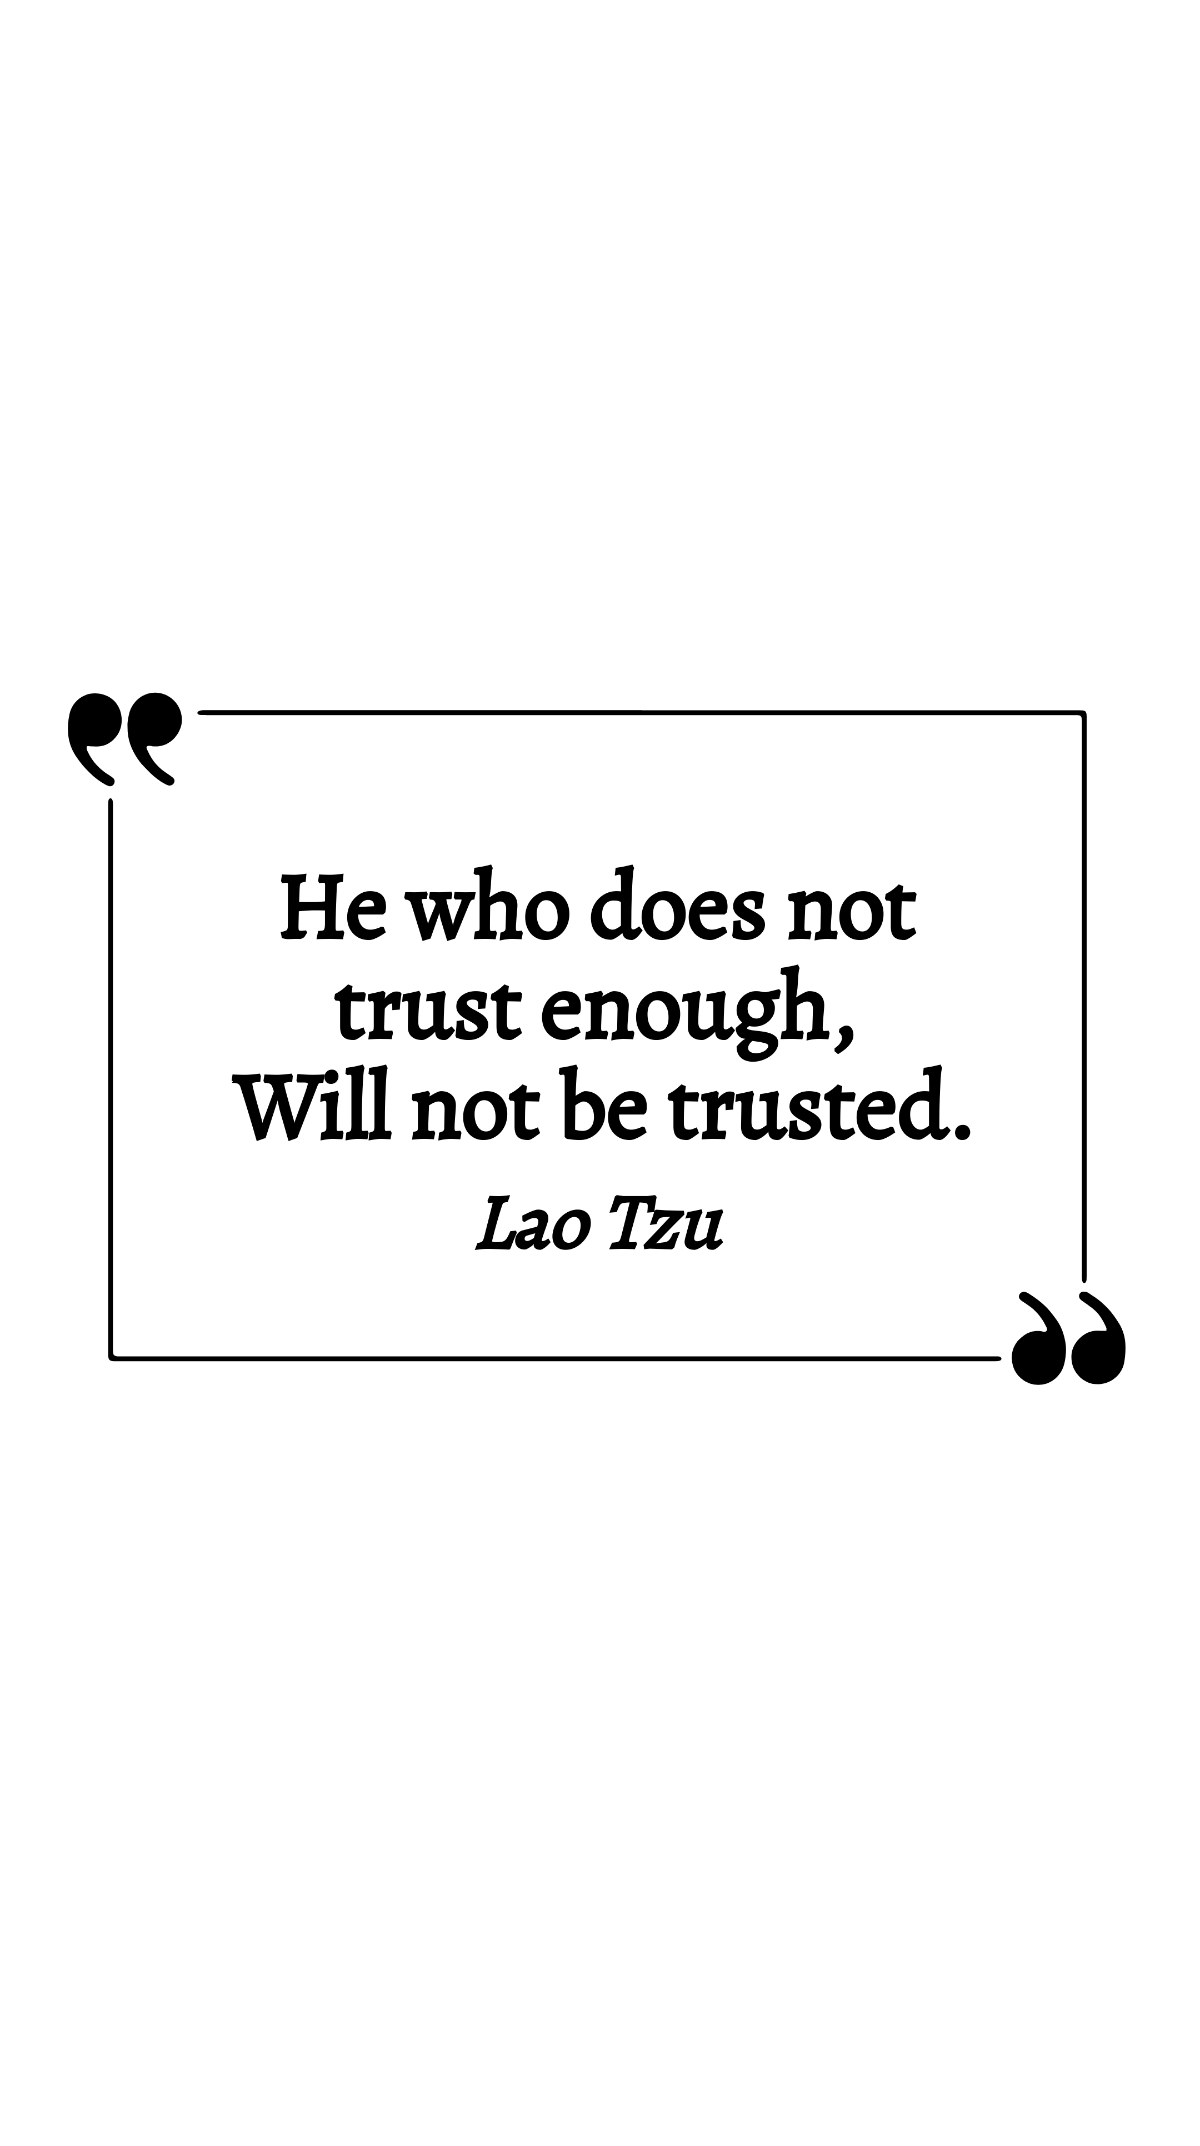 Lao Tzu - He who does not trust enough, Will not be trusted. Template